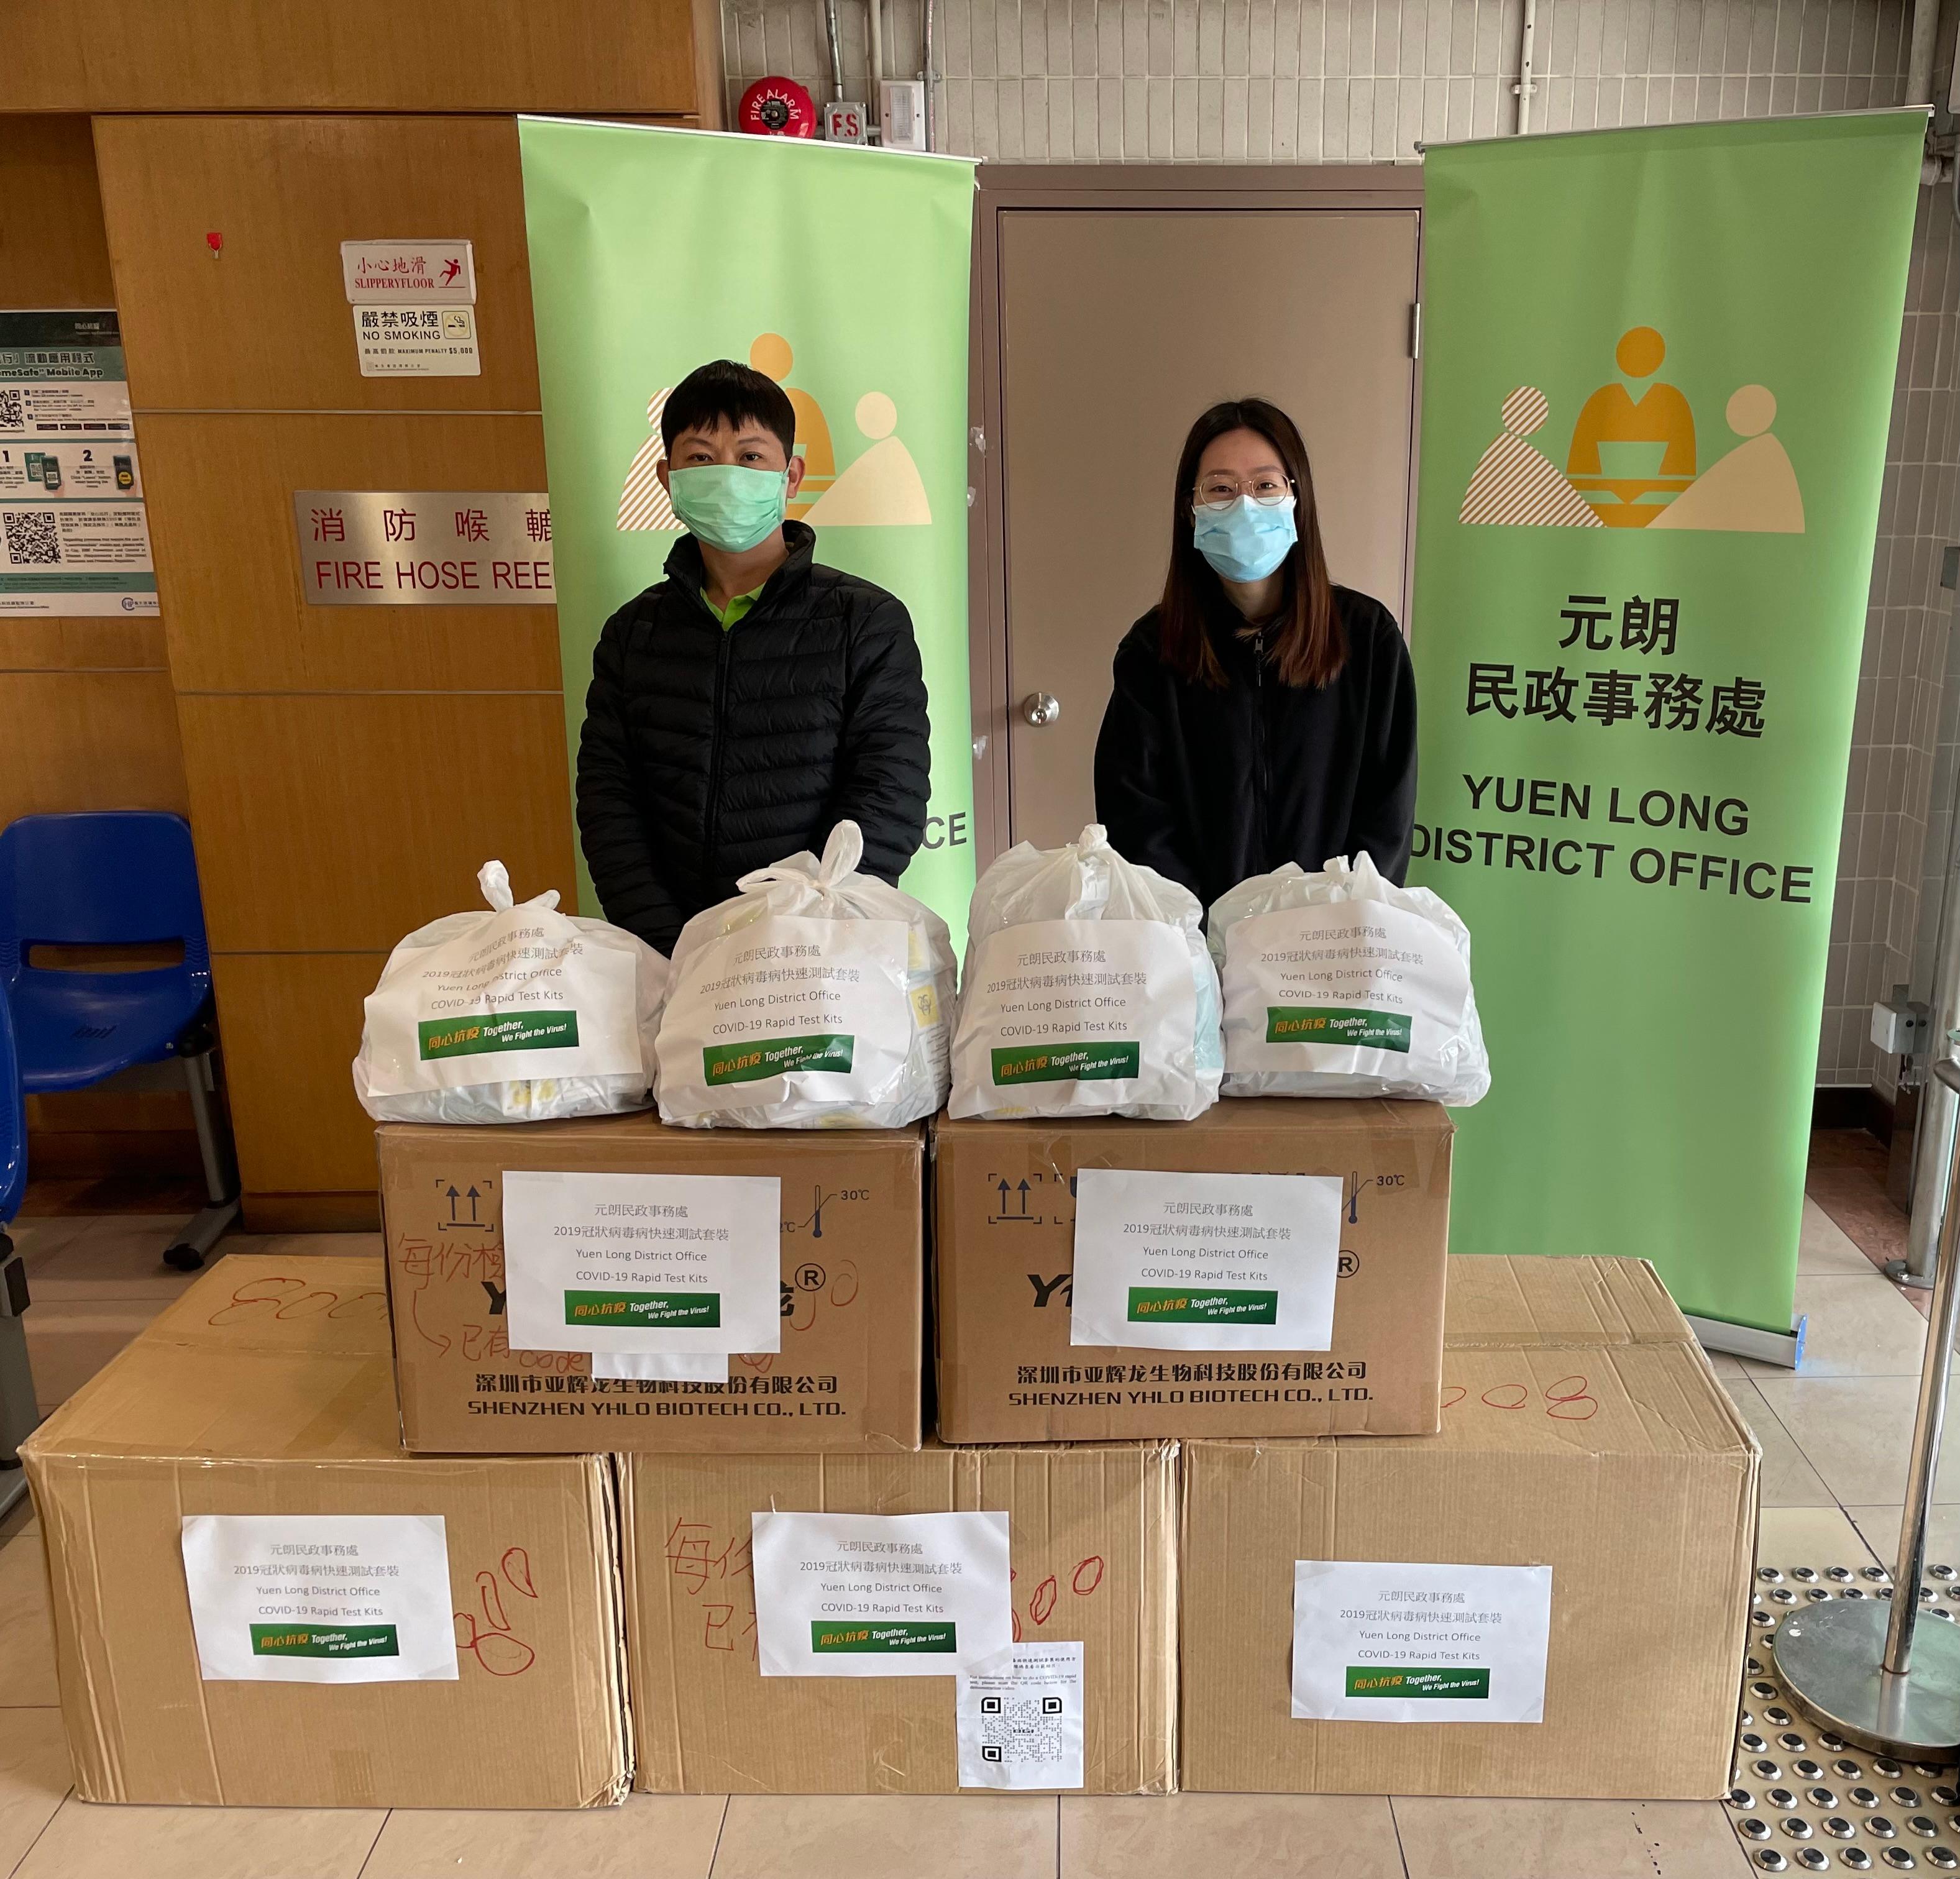 The Yuen Long District Office today (February 23) distributed rapid test kits to households, cleansing workers and property management staff living and working in Yiu Hong House and Yiu Fu House for voluntary testing through the Housing Department and the property management company of Tin Yiu (I) Estate.